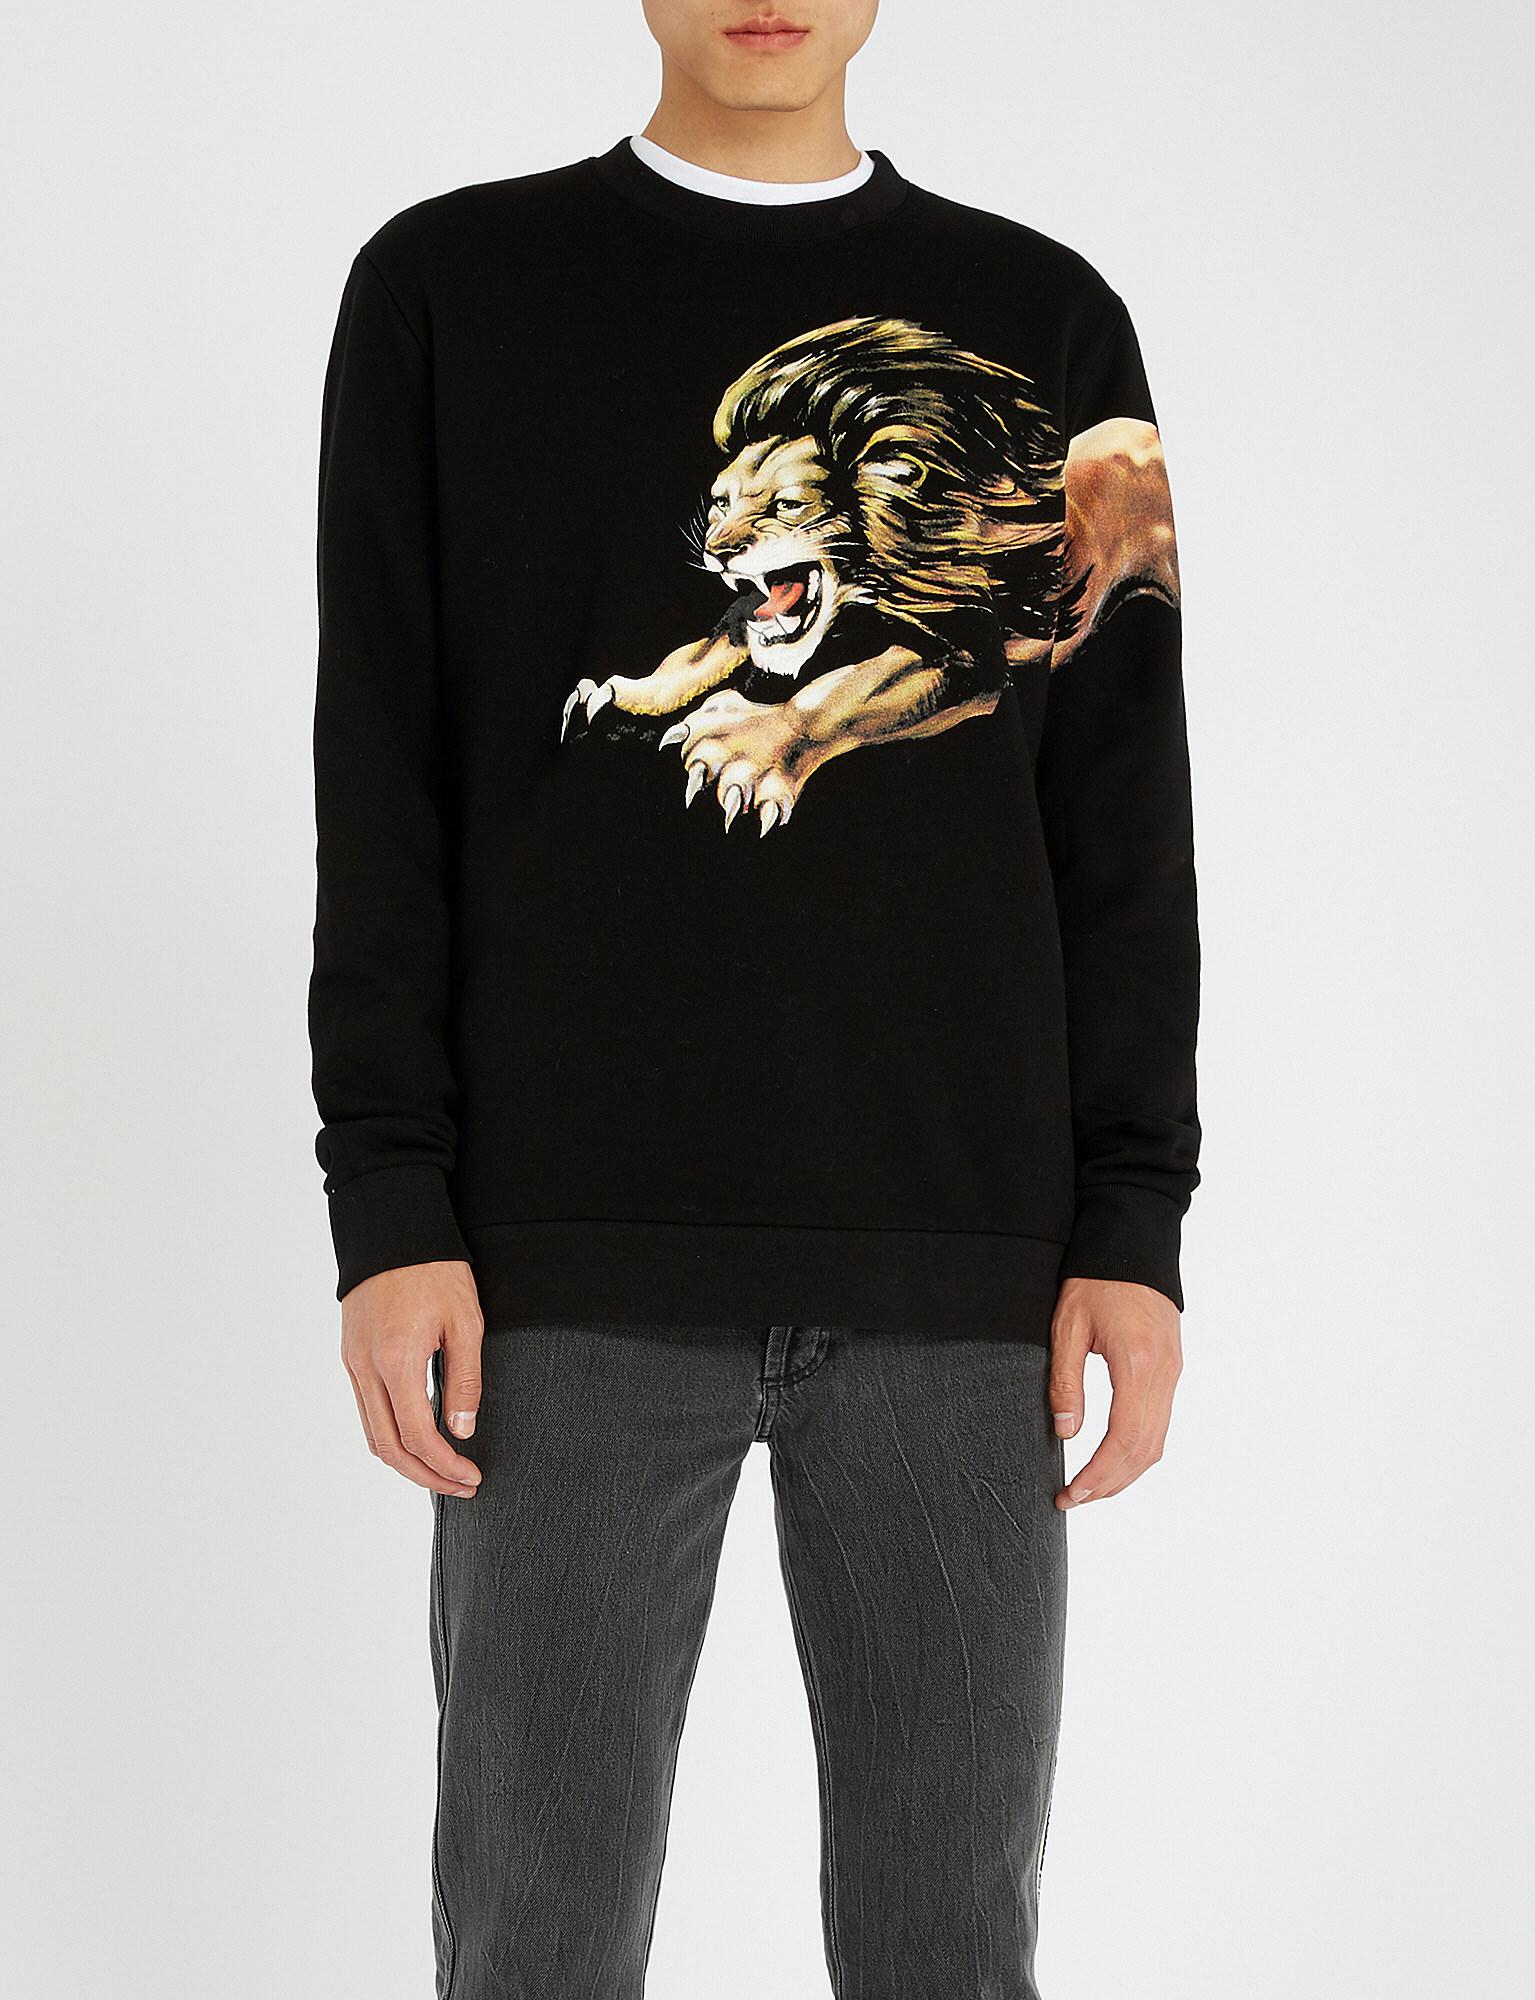 Givenchy Lion Print Cotton Jumper in 